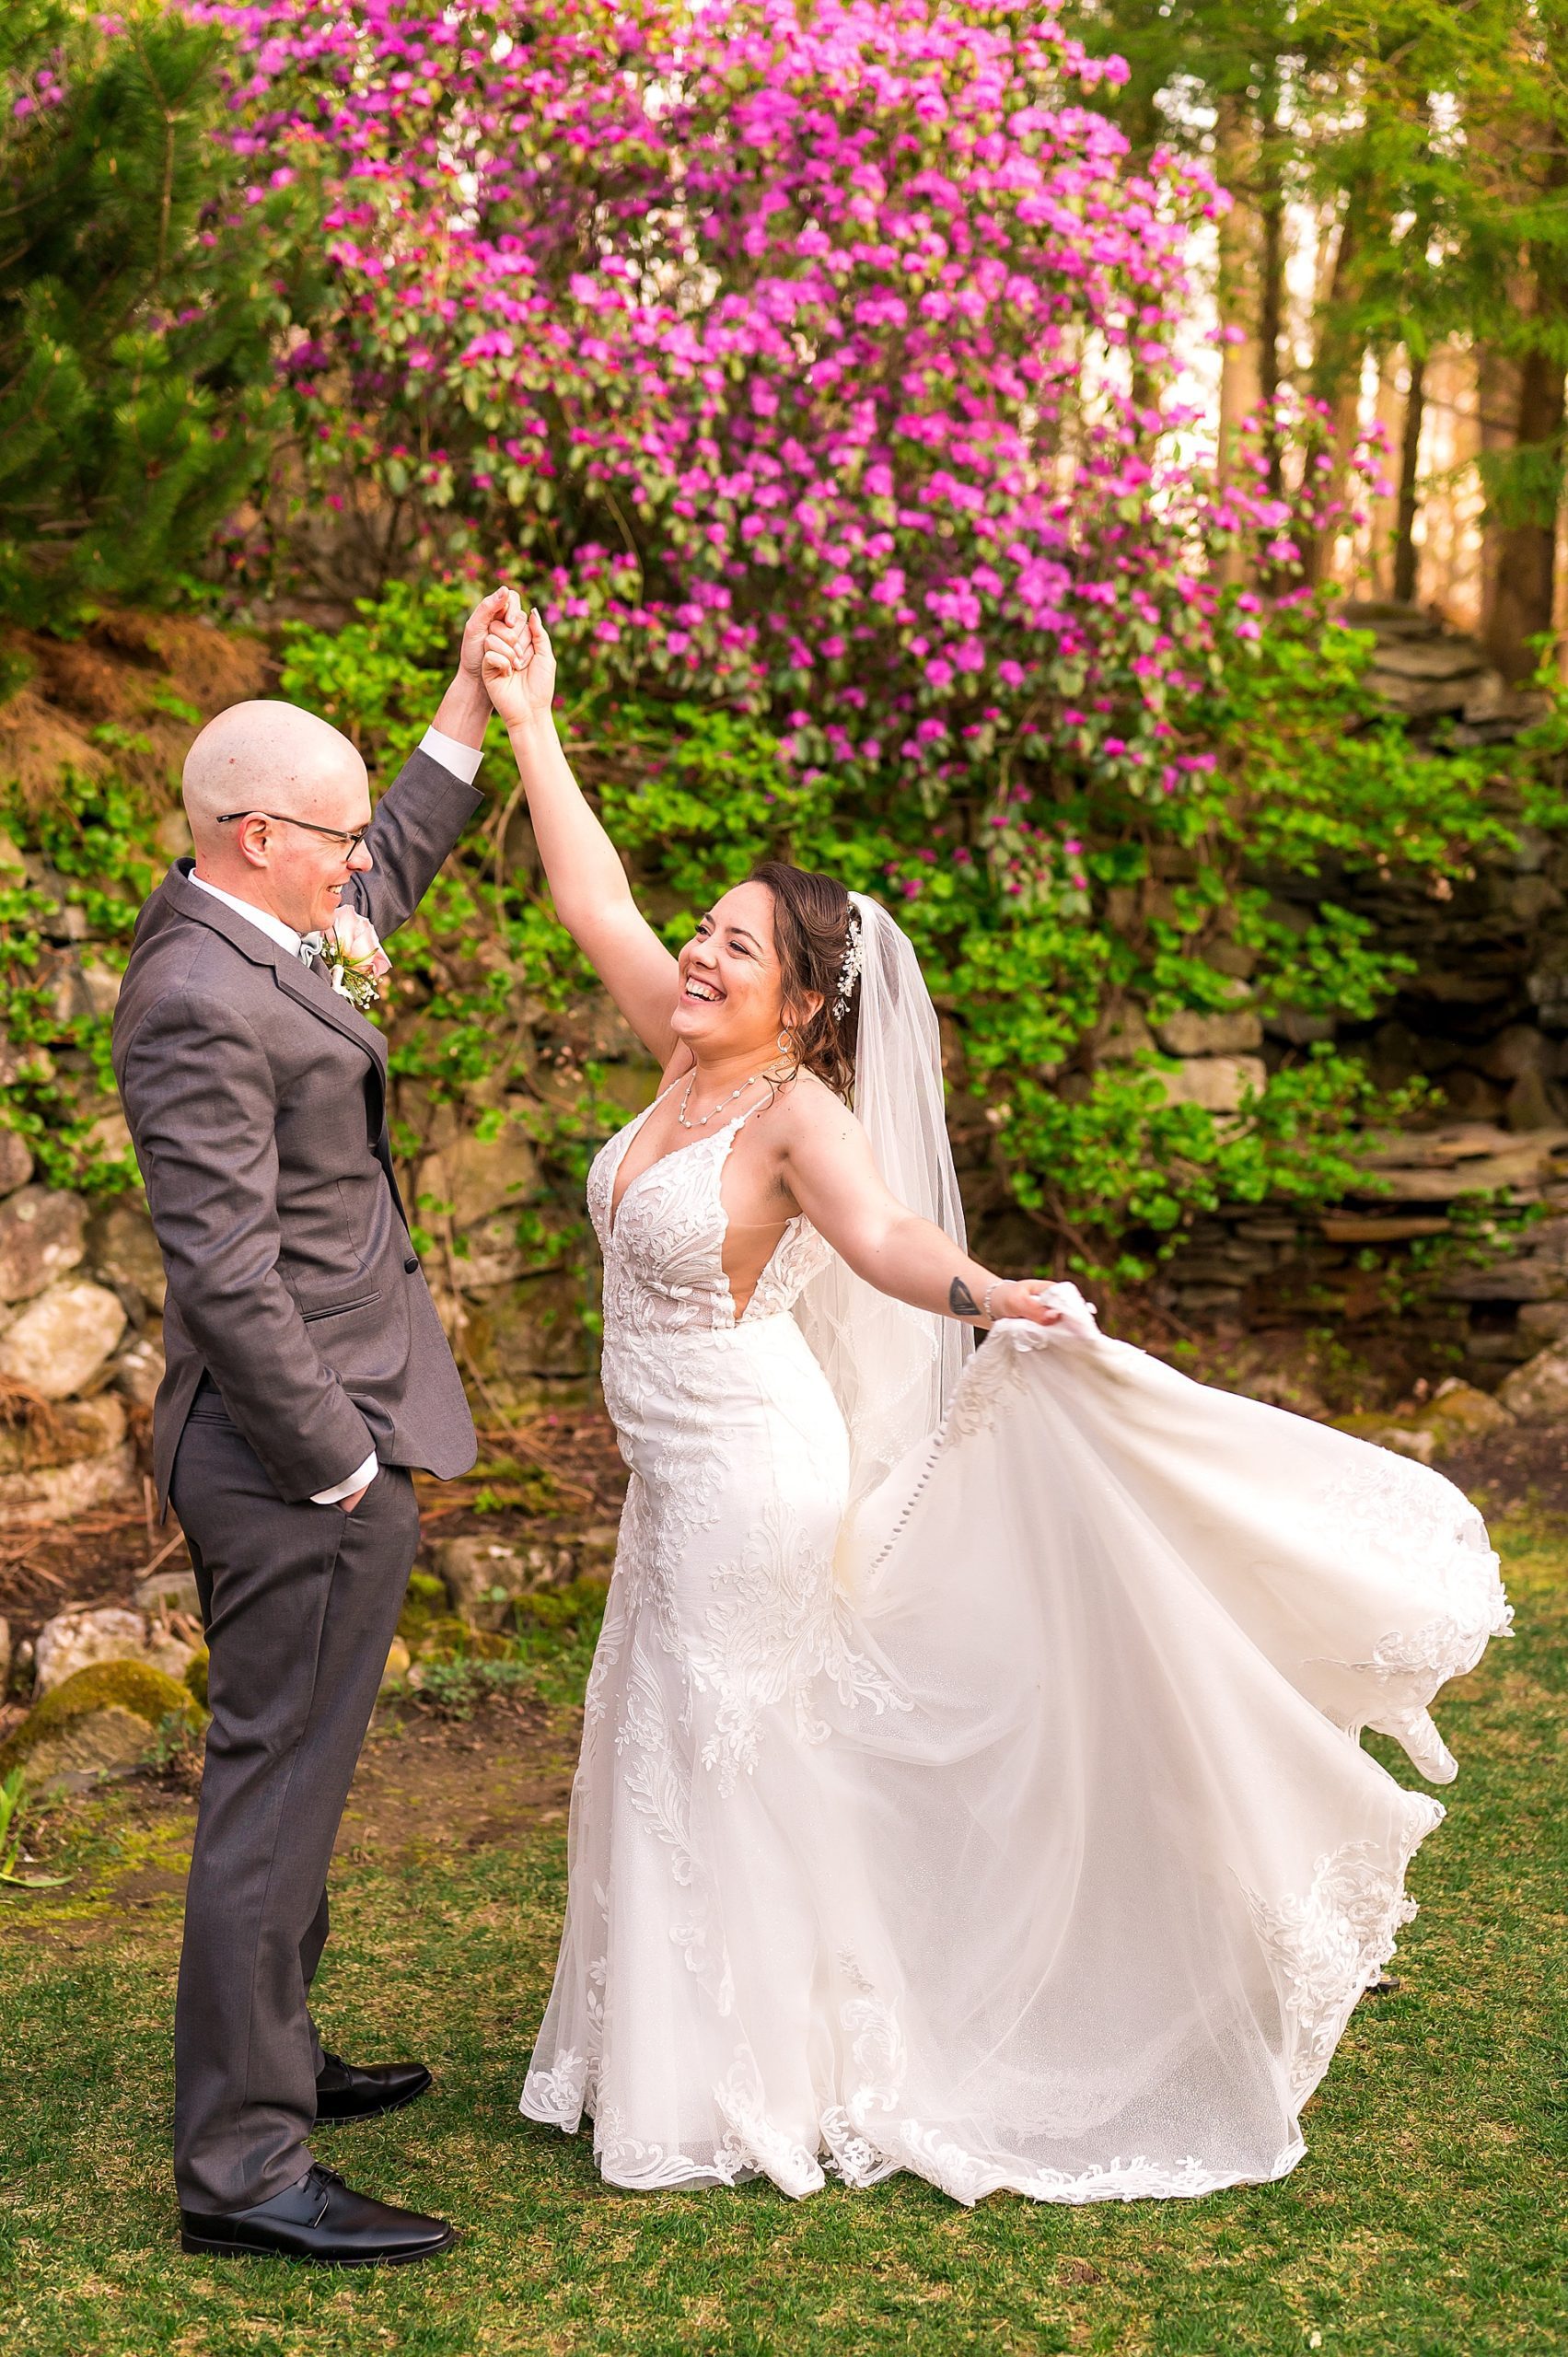 newlyweds dance and have fun during portraits